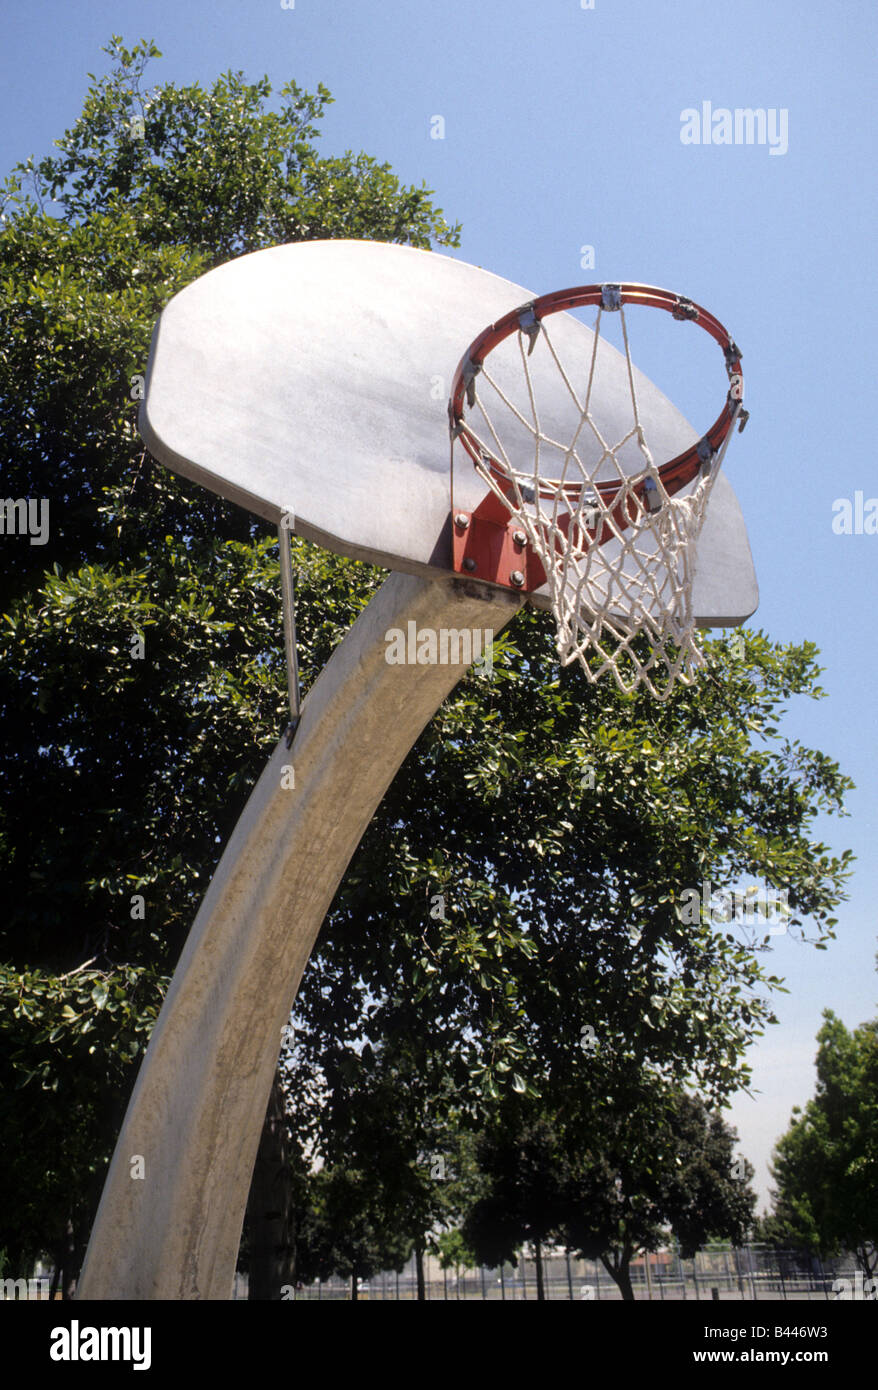 basketball backboard, rim, and net on support pole in city park. Stock Photo